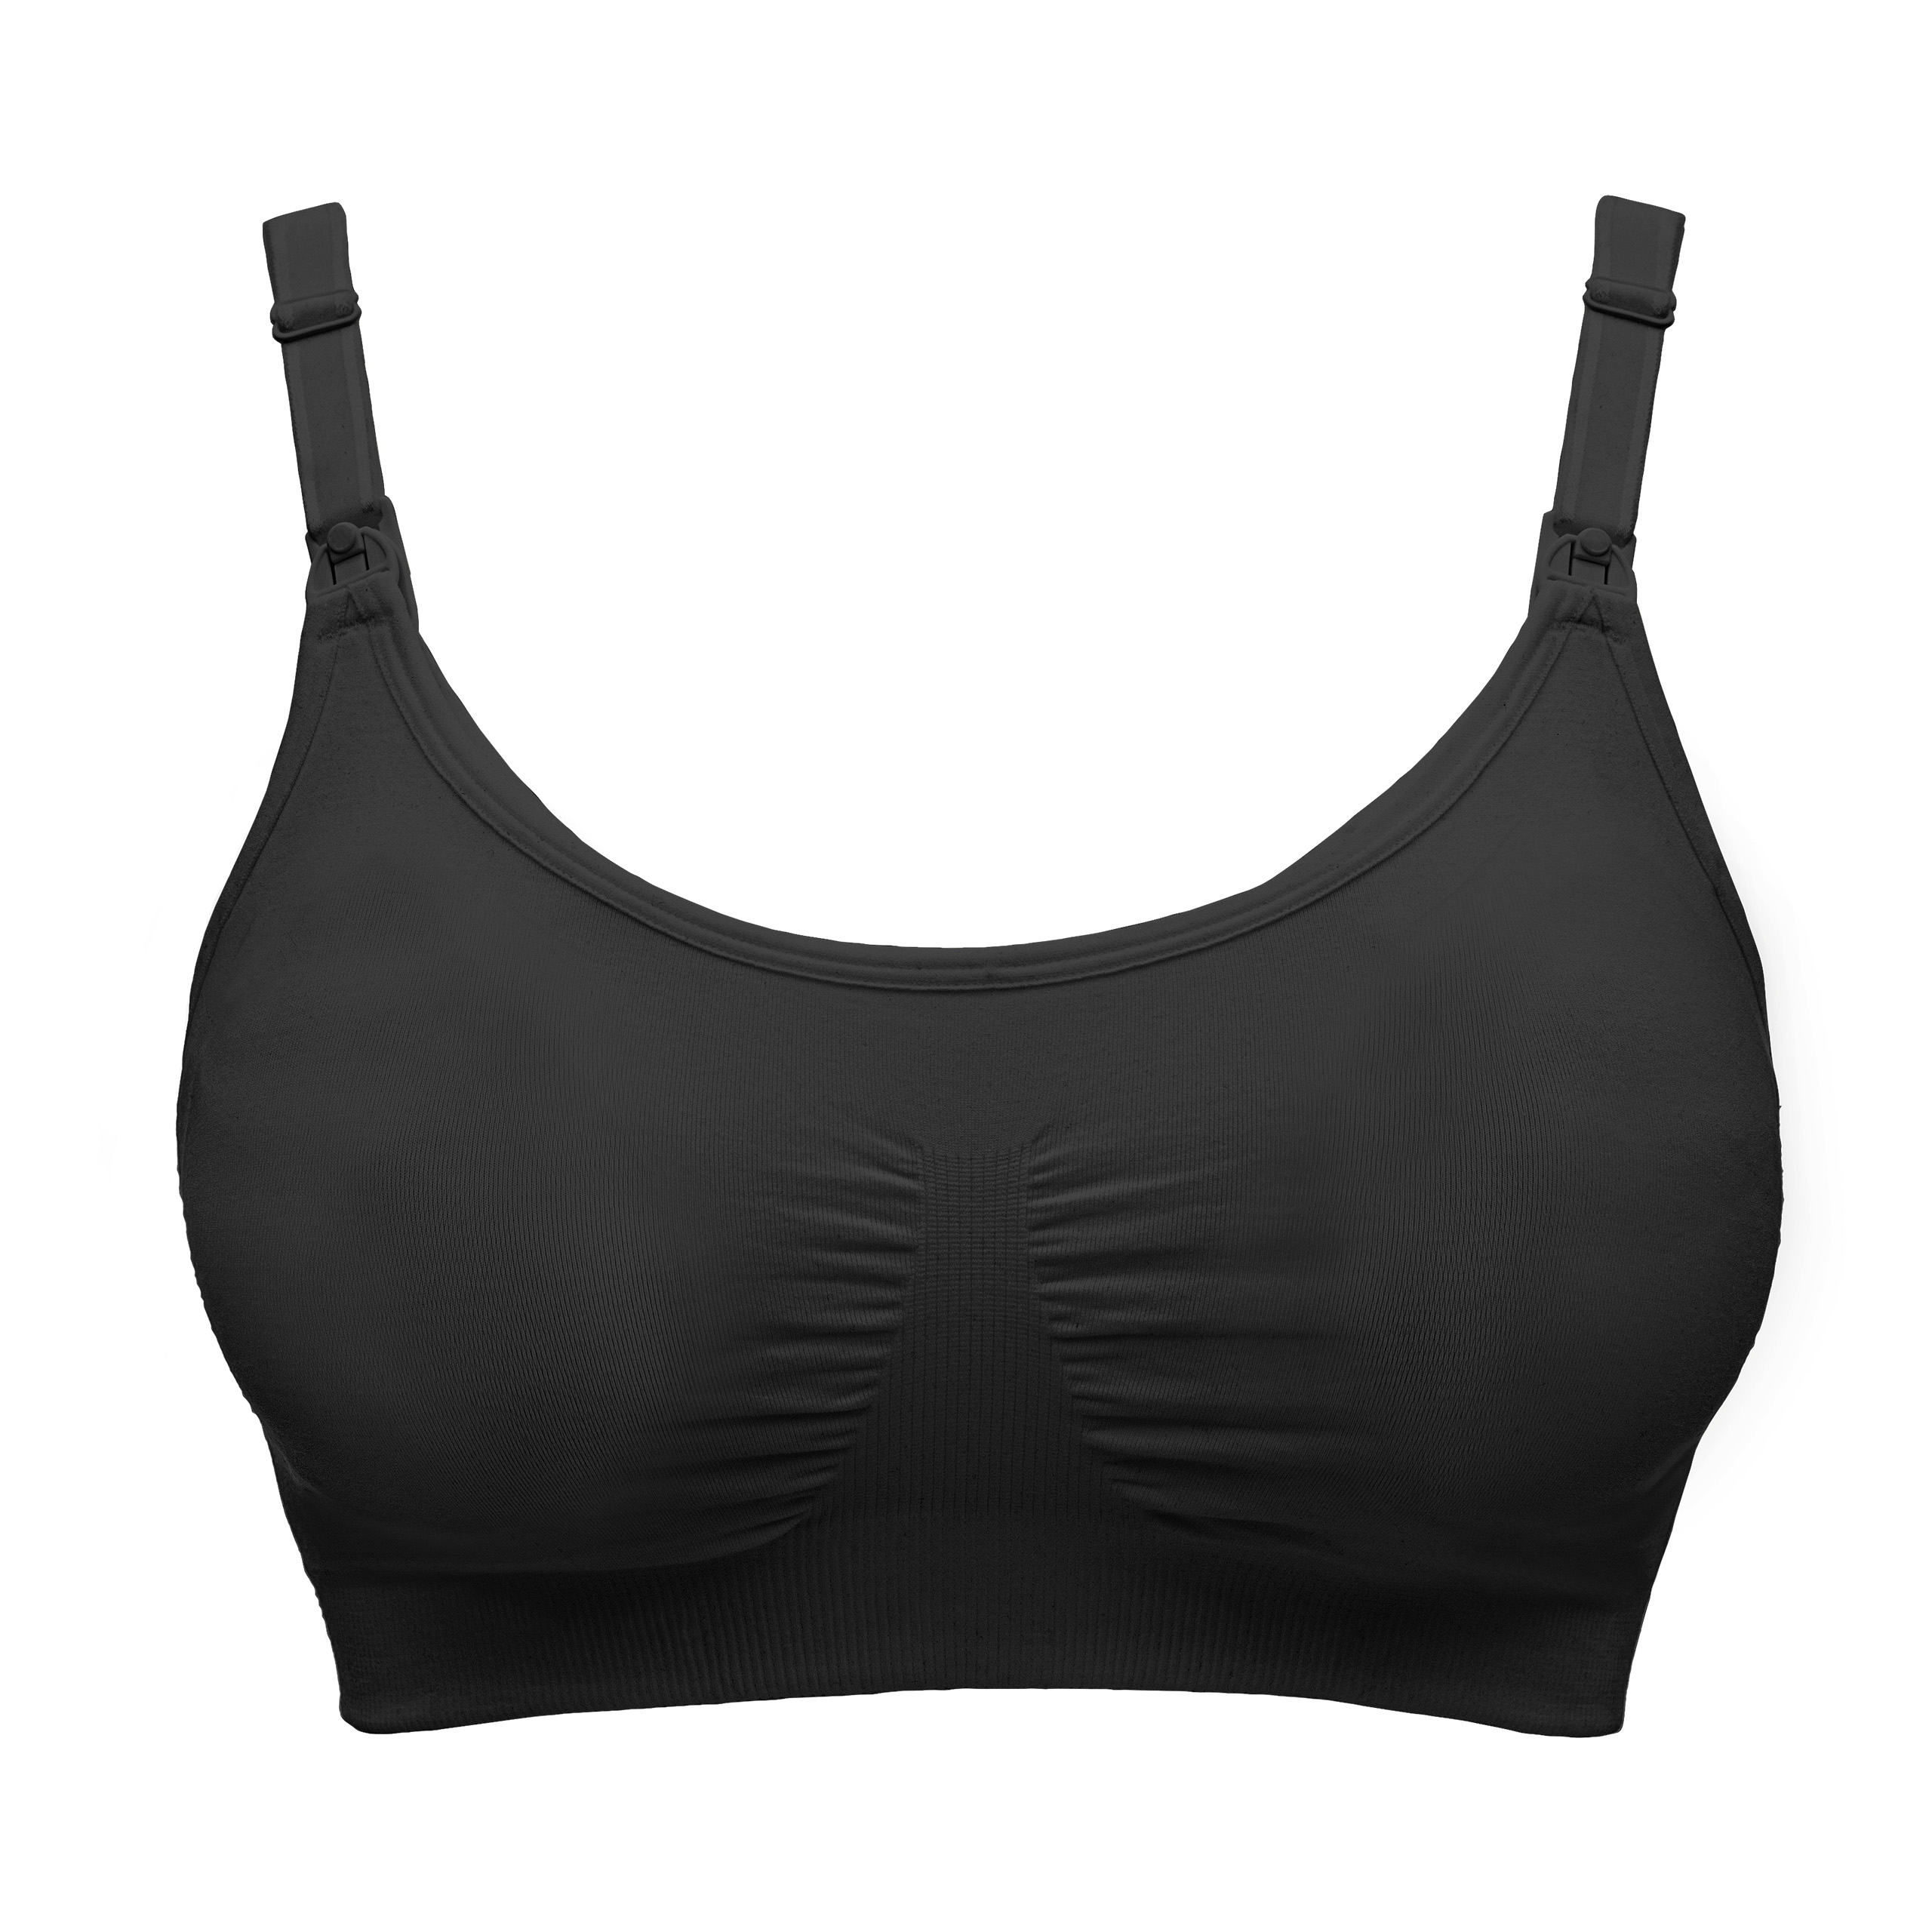  Hands Pumping Bra, Black Comfortable Breathable Breast